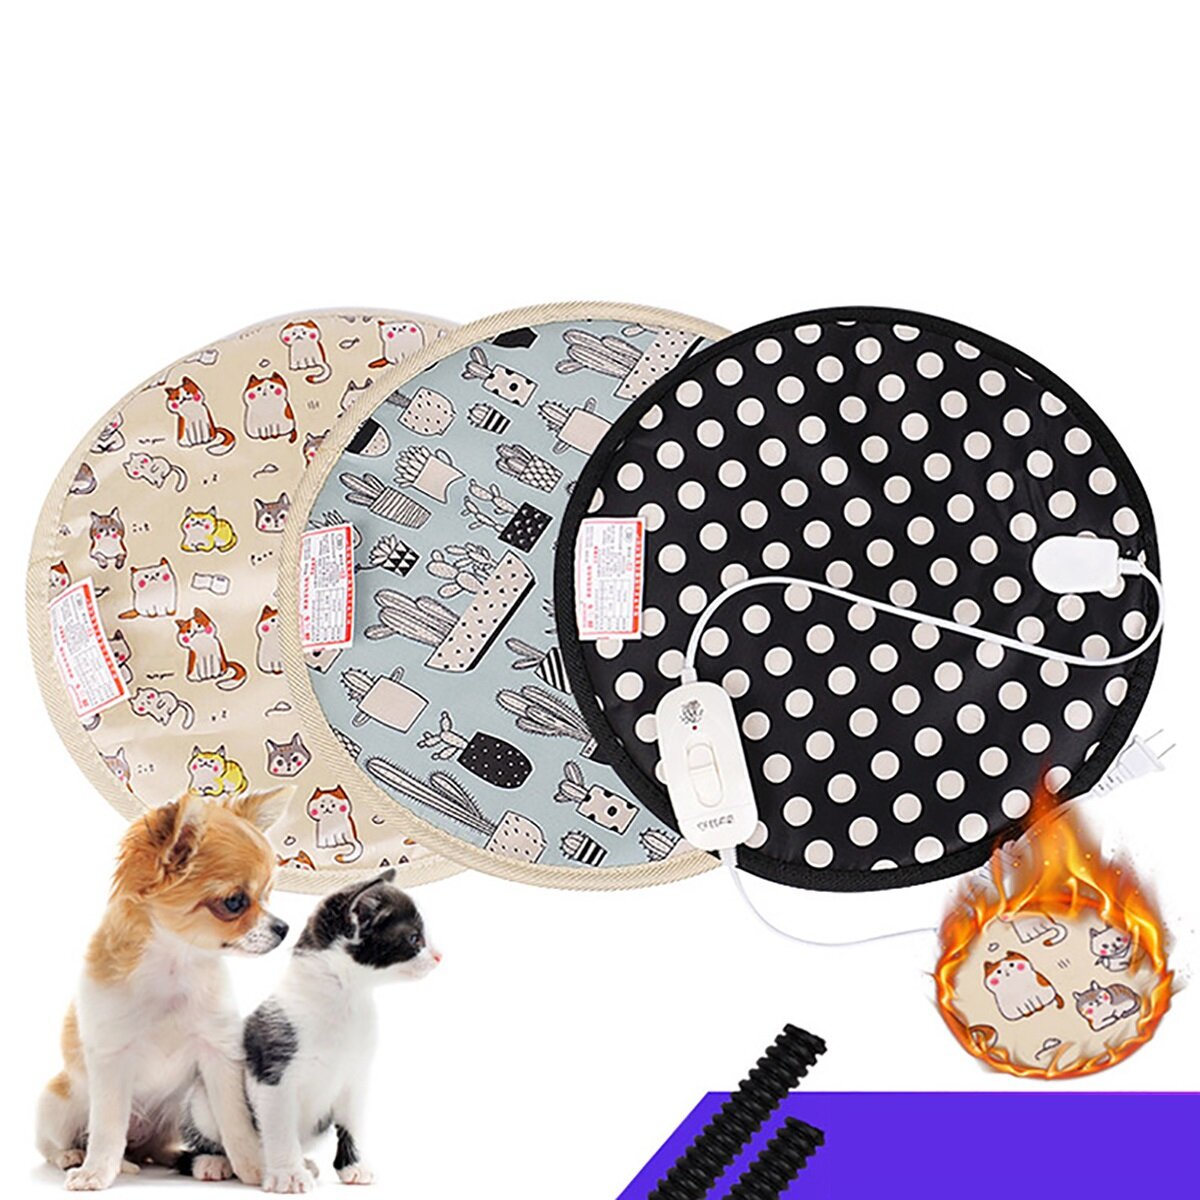 220V Pet Electric Heater Pad Winter Warm Heater Carpet for Dog Cat Temp Control Heated for Pet Mat Blanket